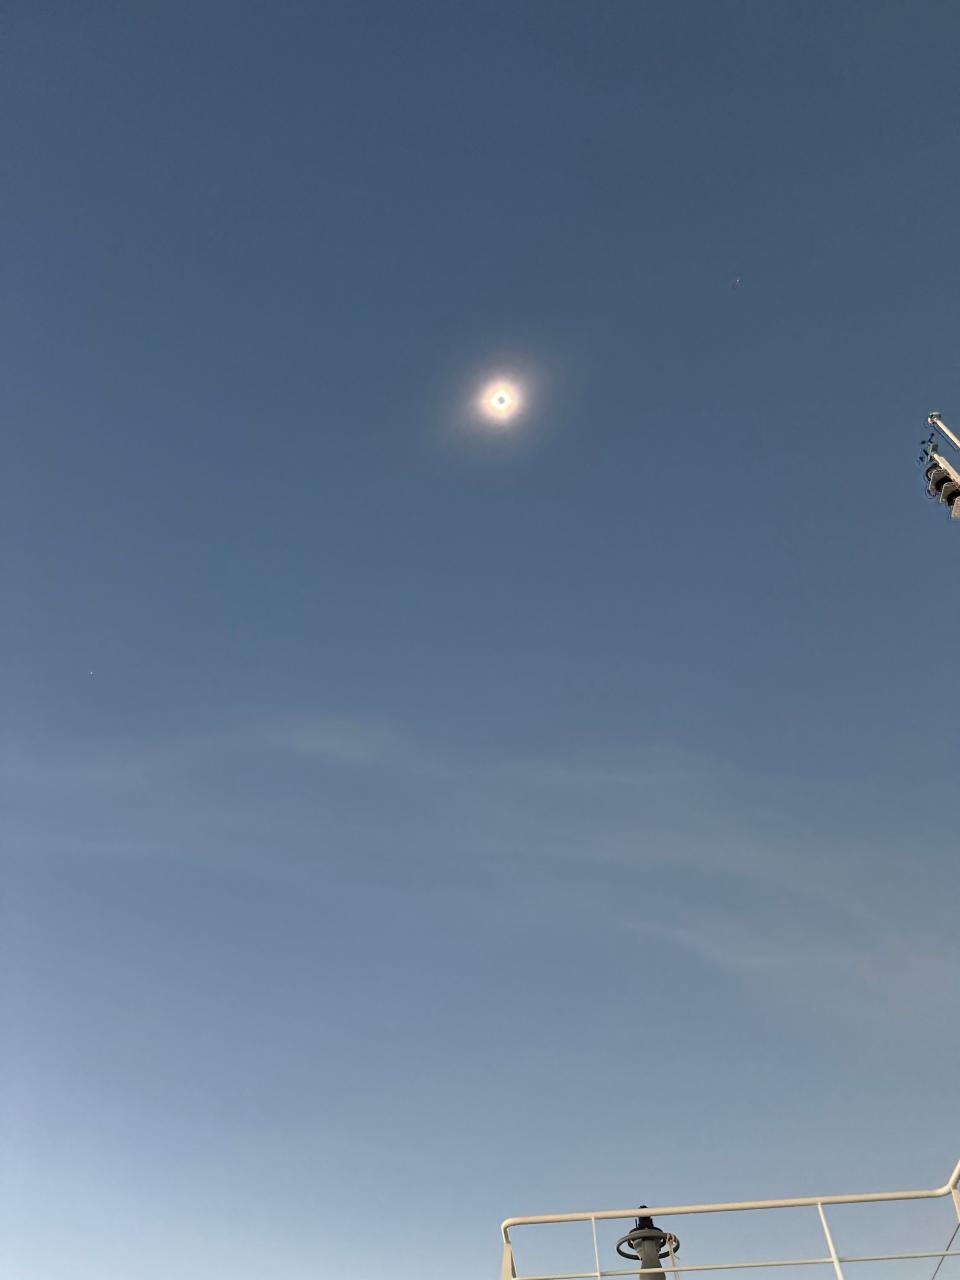 The total solar eclipse seen from Holland America's Koningsdam ship.